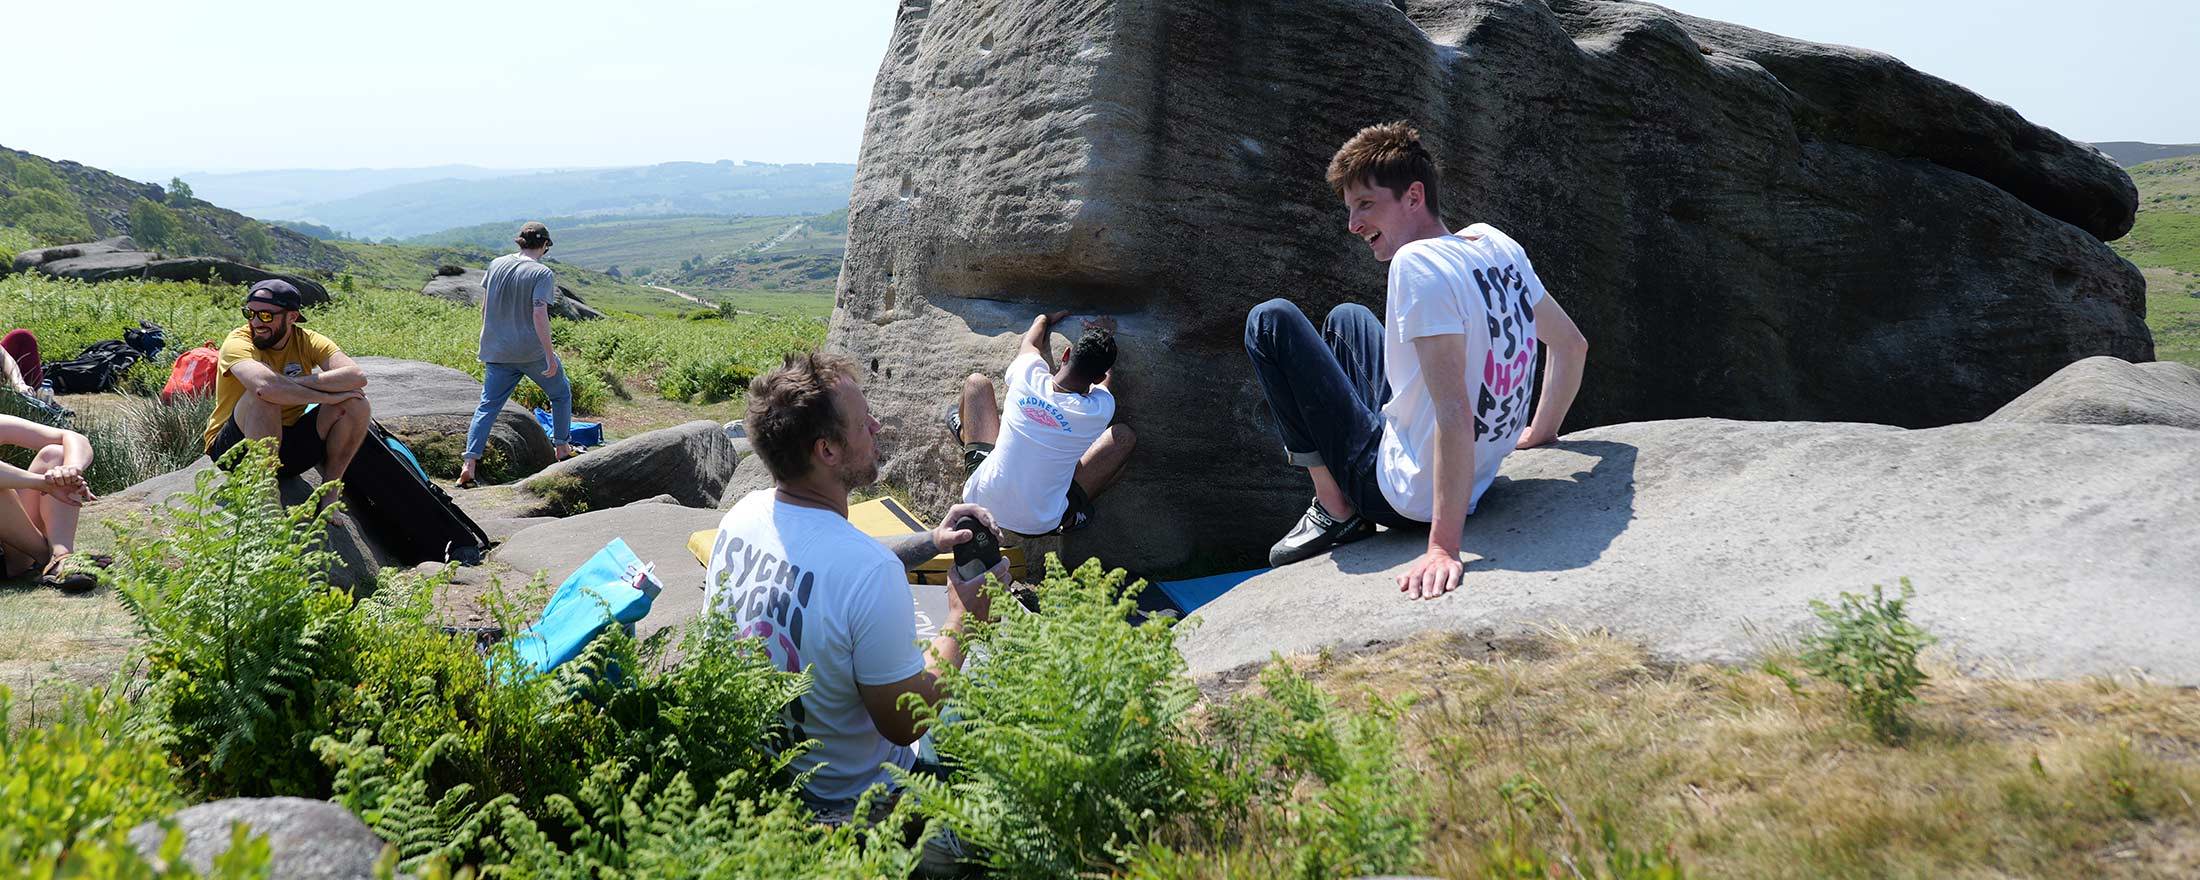 Psychi rock climbing team of athletes climbing on boulder at Stanage Plantation in the Peak District 